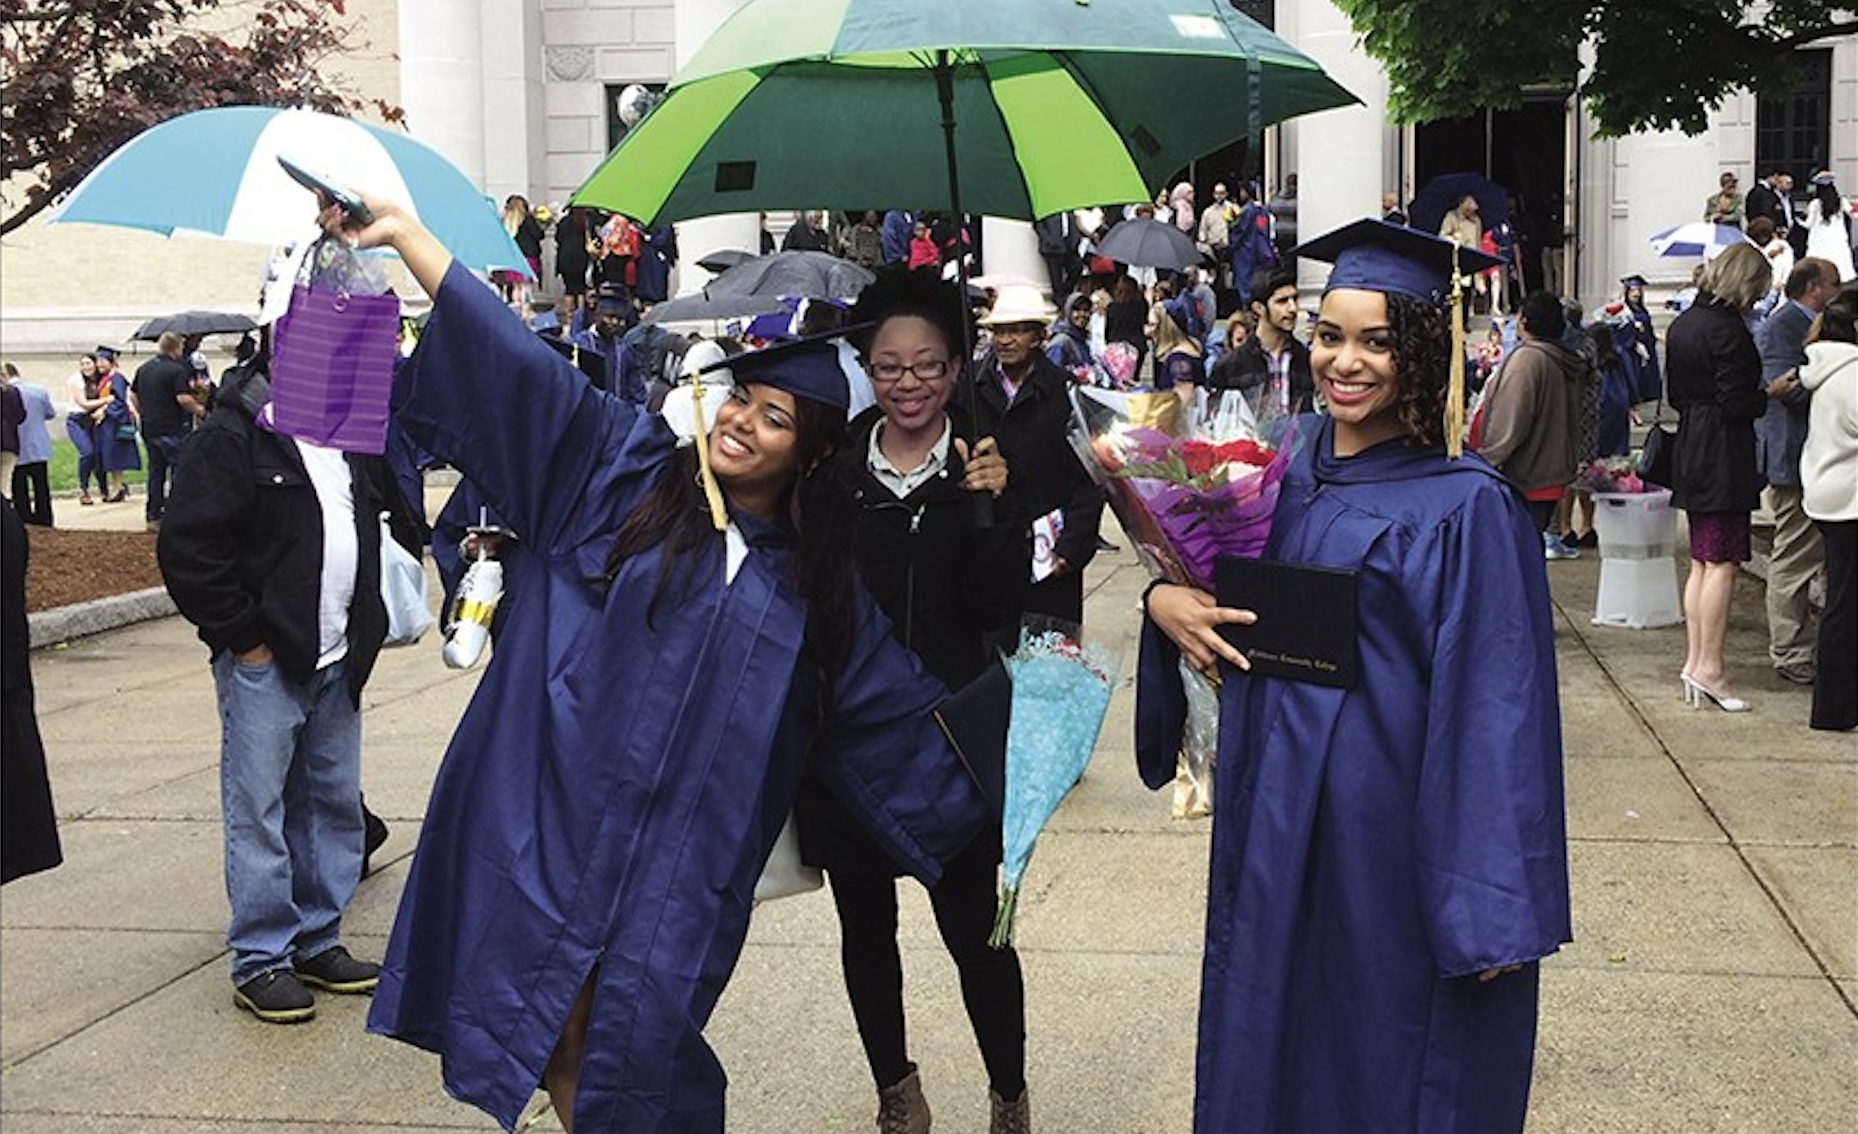 A picture of three women of color on graduation day. Two are wearing purple graduation robes, smiling, one of whom has her hands in the air. The third woman is standing in between the two graduates, wearing a black coat and holding an umbrella. Graduates and their families are in the background.